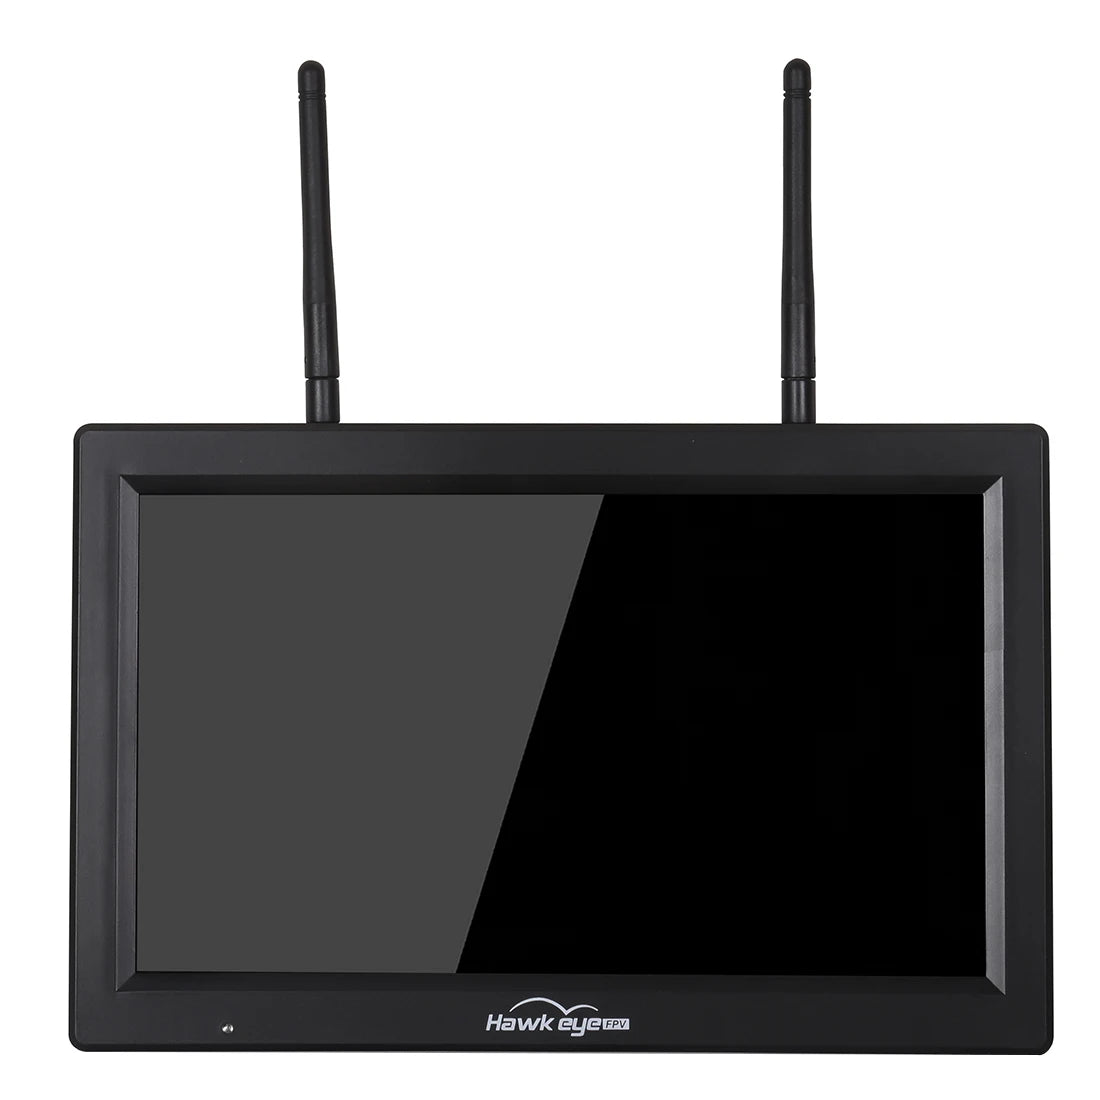 Hawkeye Little Pilot High Bright Screen, built-in DVR system won’t cause any delay in receiving signal . blue screen